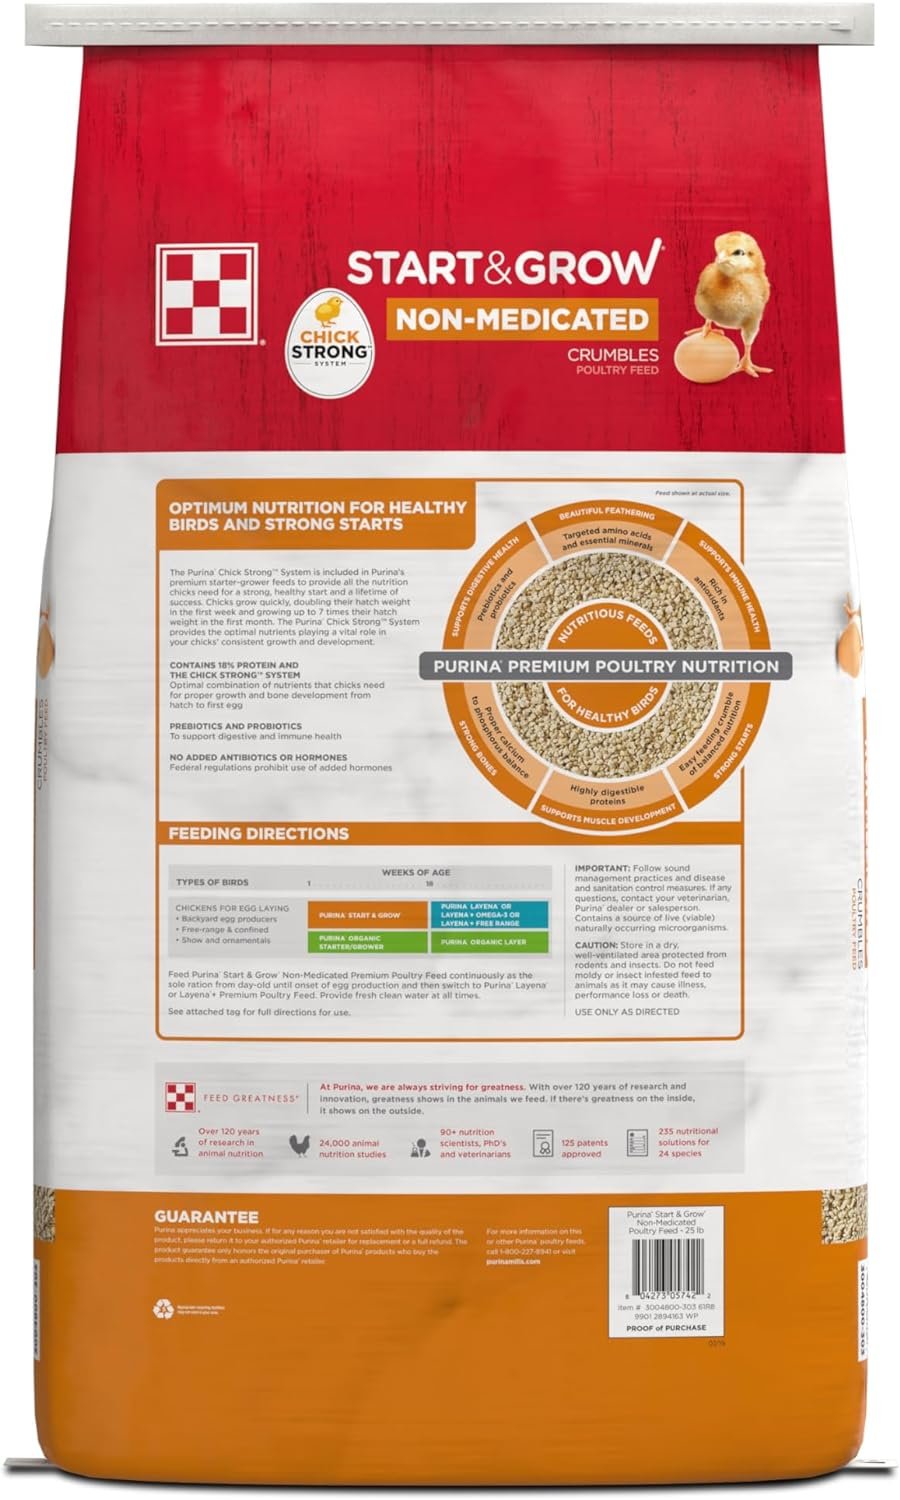 Purina Start and Grow | Non-Medicated Chick Feed Crumbles | Nutritionally Complete - 25 Pound (25 lb.) Bag